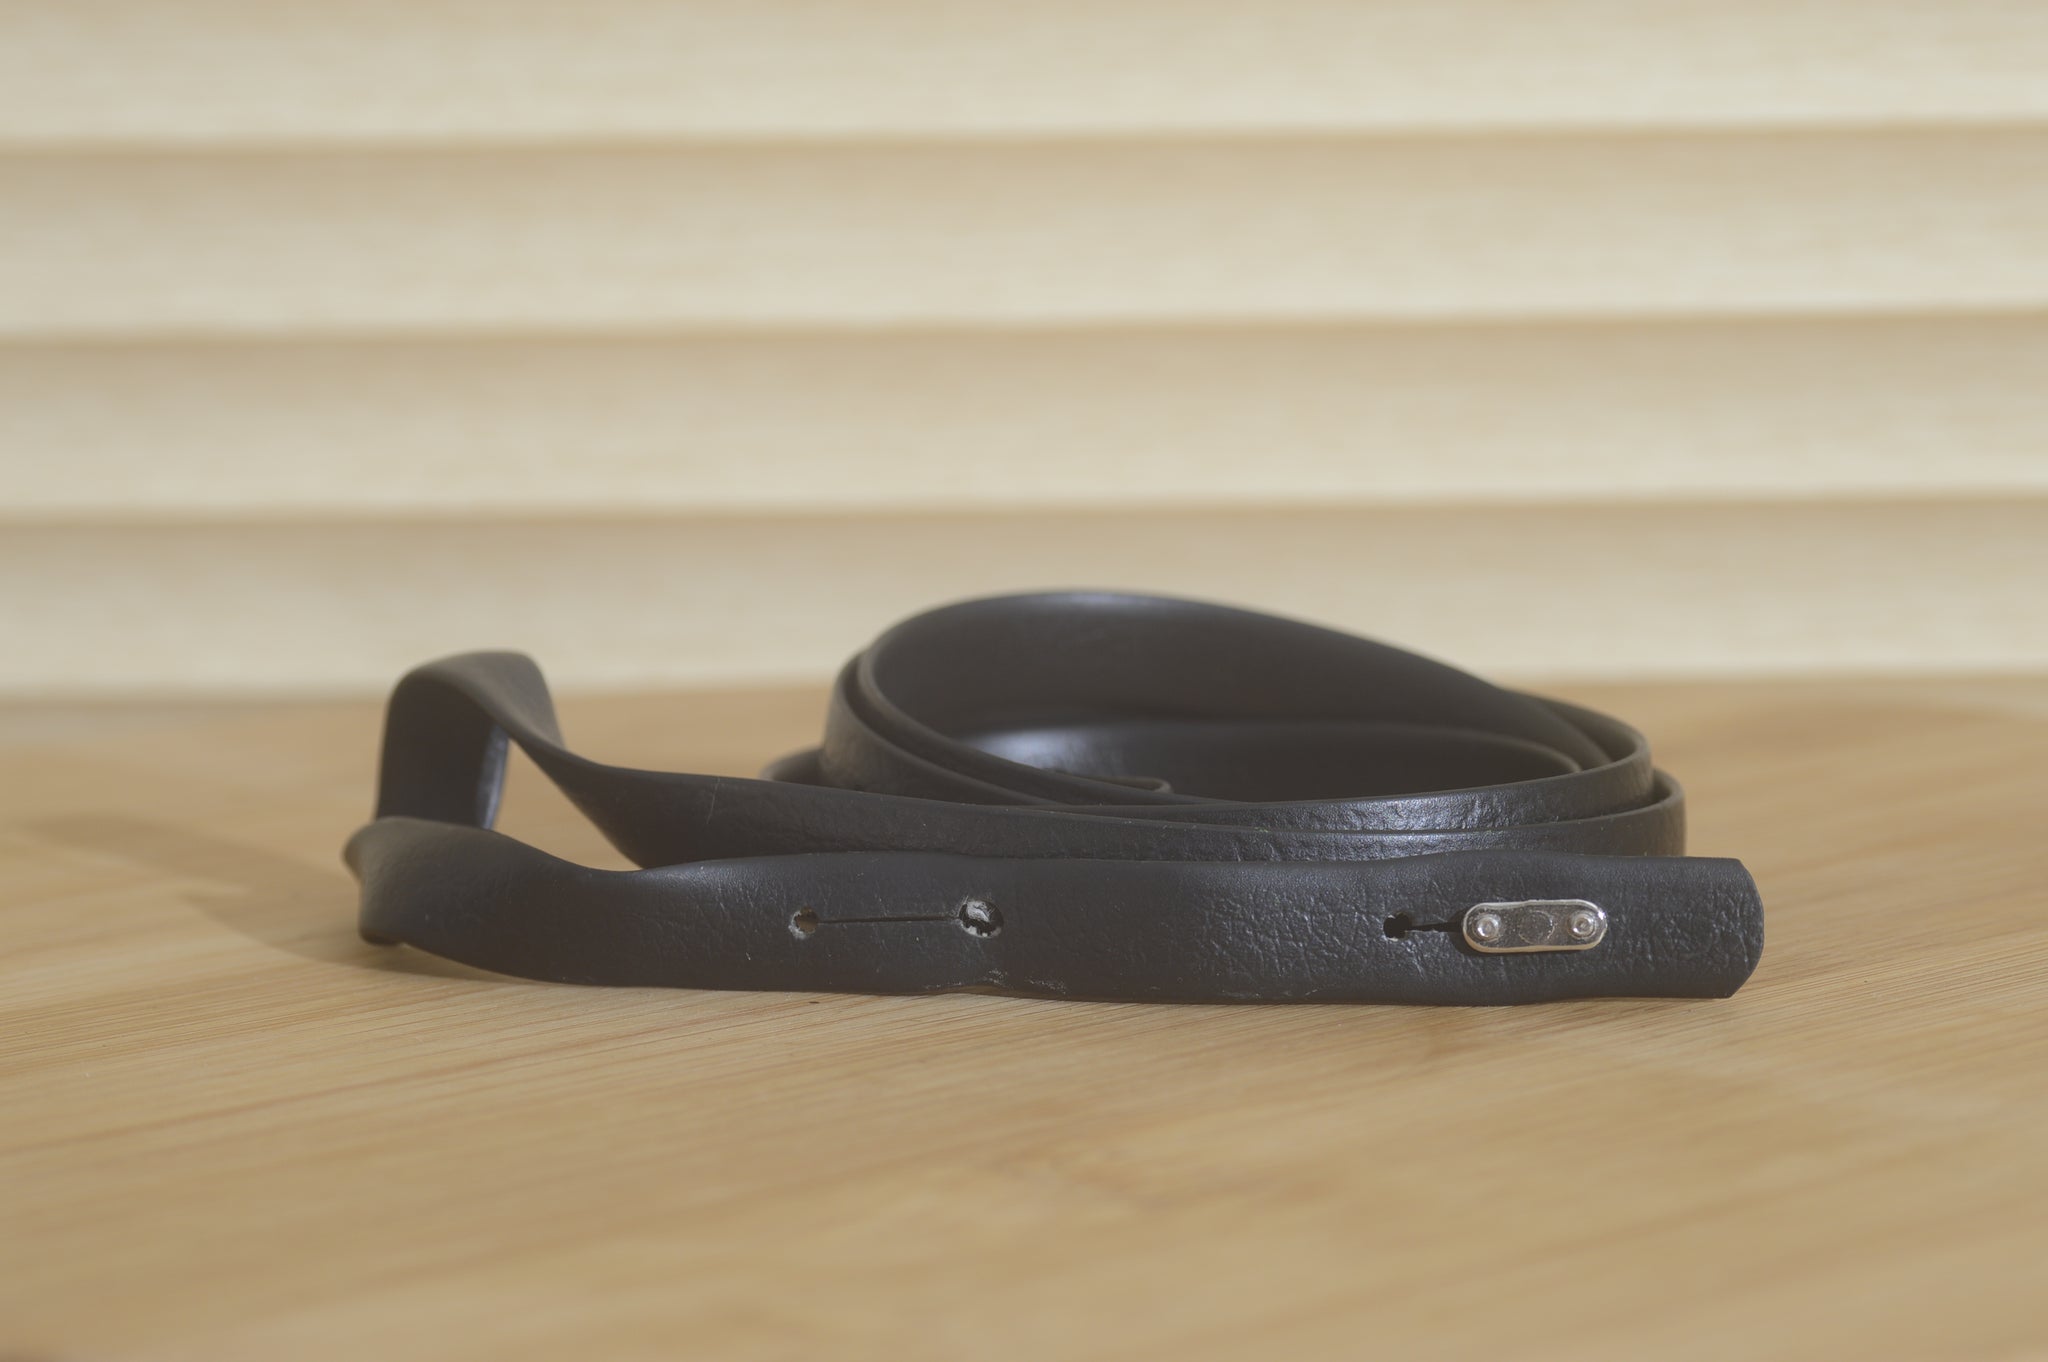 Black Leather Camera Strap. A lovely addition to your vintage set up. - RewindCameras quality vintage cameras, fully tested and serviced